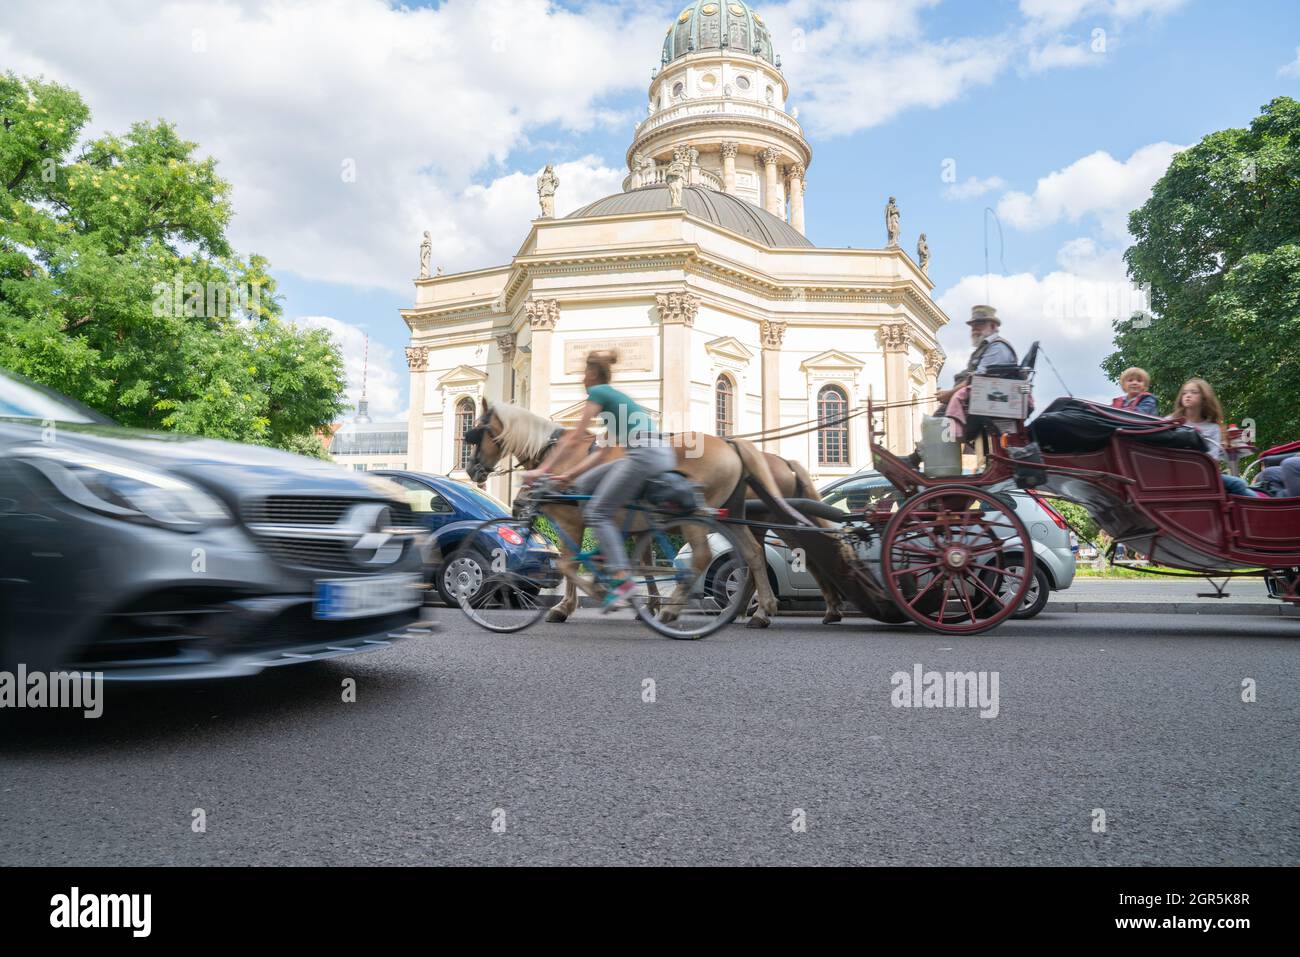 Berlin, Germany - September 25, 2017: Traditional style building with brass dome and gold statue with three modes of transport blurred in motion passi Stock Photo